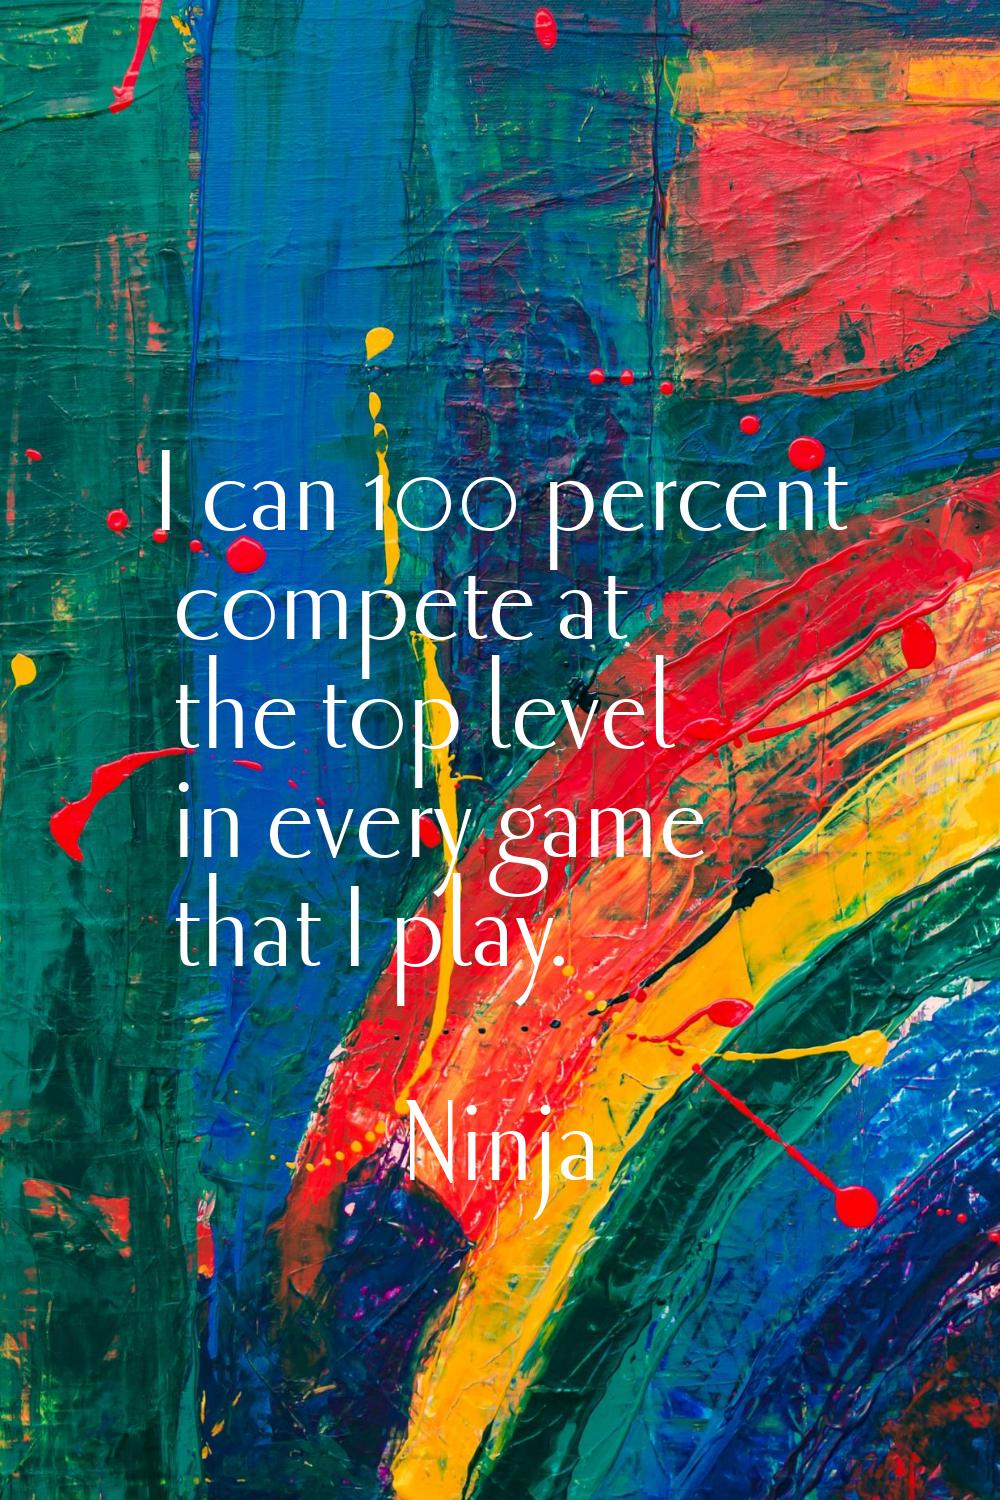 I can 100 percent compete at the top level in every game that I play.